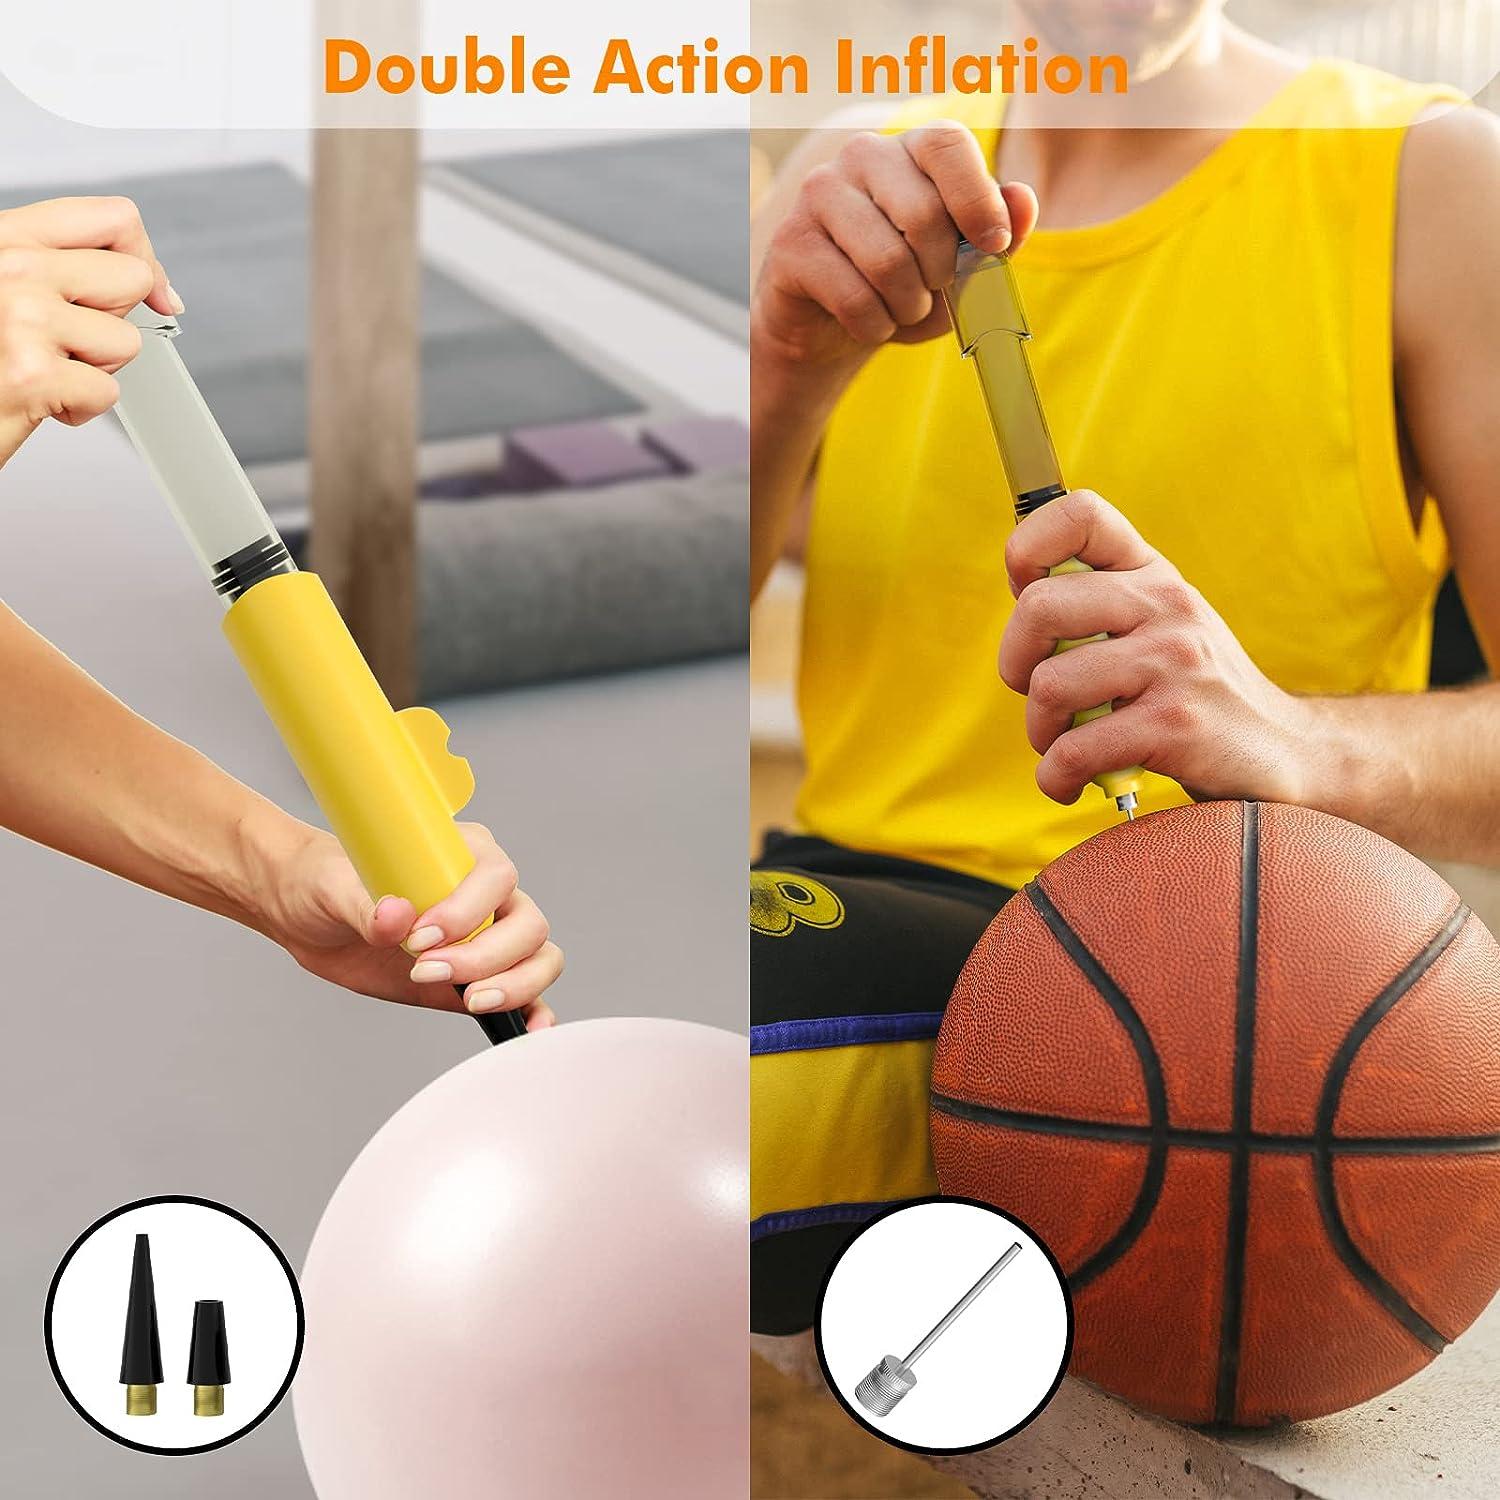 Amble Air Ball Pump for Basketball, Soccer Ball, Volleyball, Football,  Balloons Pump Inflator - Portable Hand Exercise Sports Ball Pump Kit with 5  Inflation Needles, Nozzle, Hose & Air Pressure Gauge Yellow